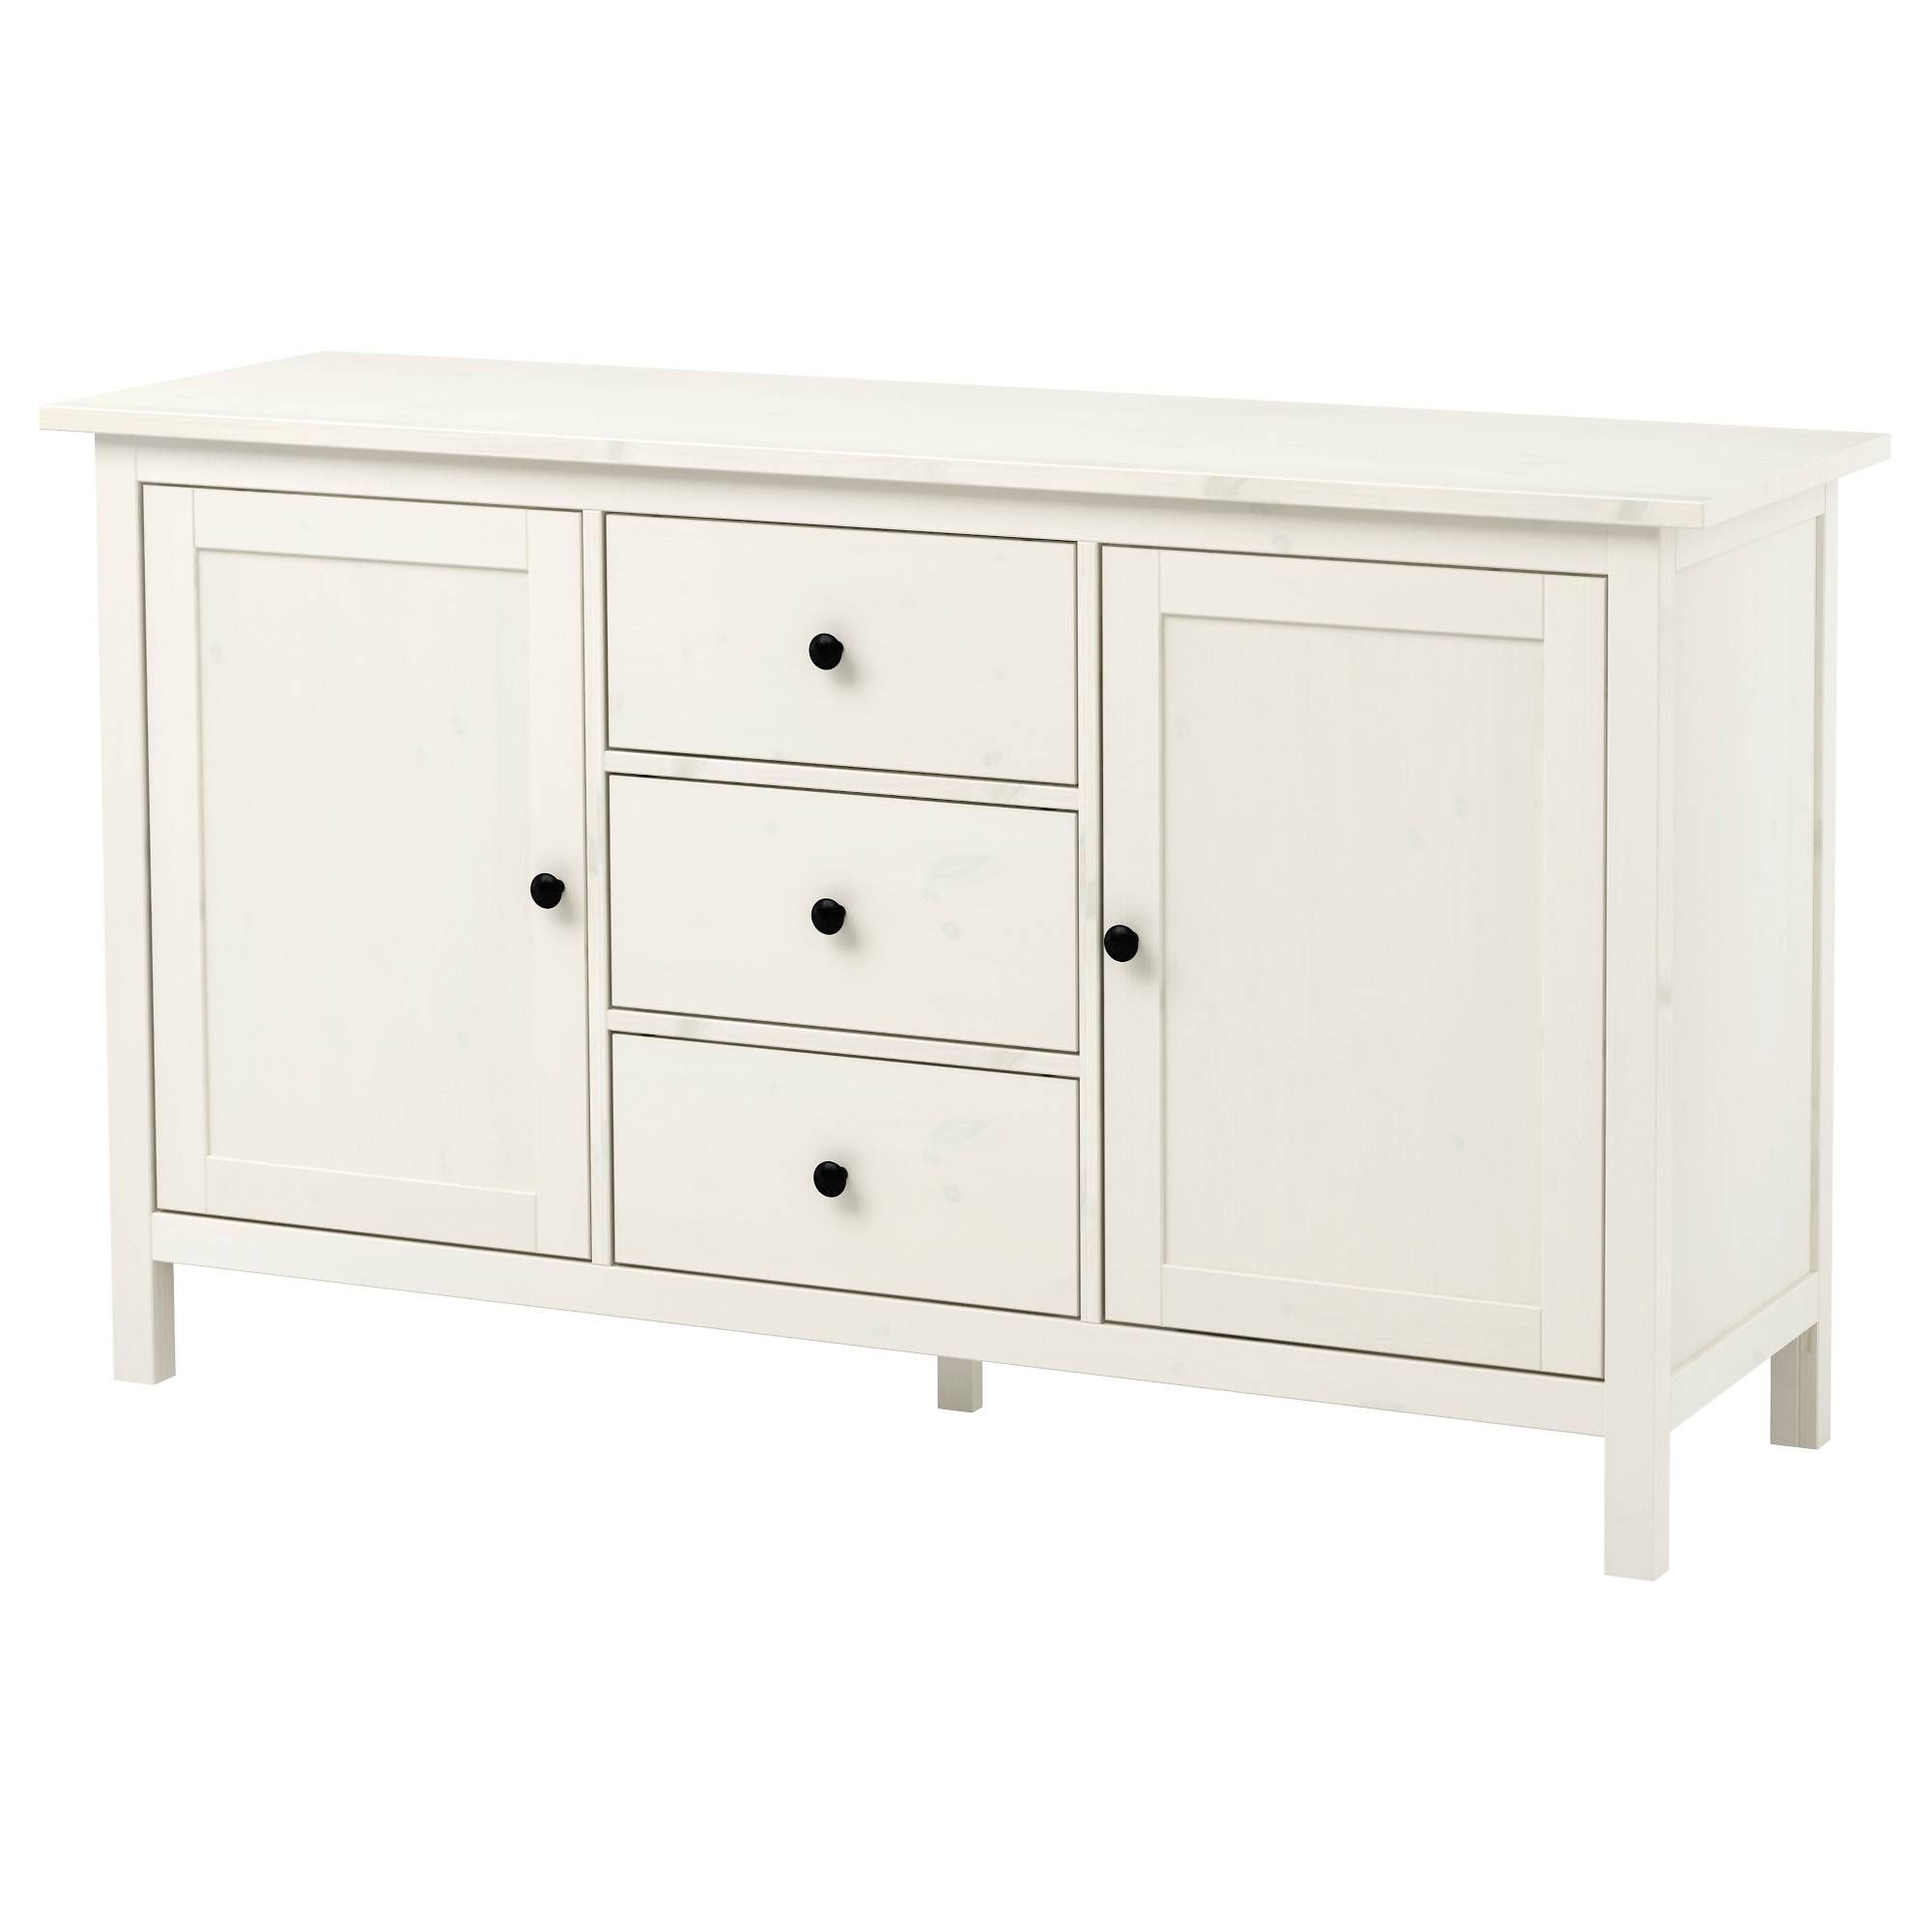 Hemnes Sideboard White Stain 157x88 Cm – Ikea For White Sideboard Furniture (View 2 of 30)